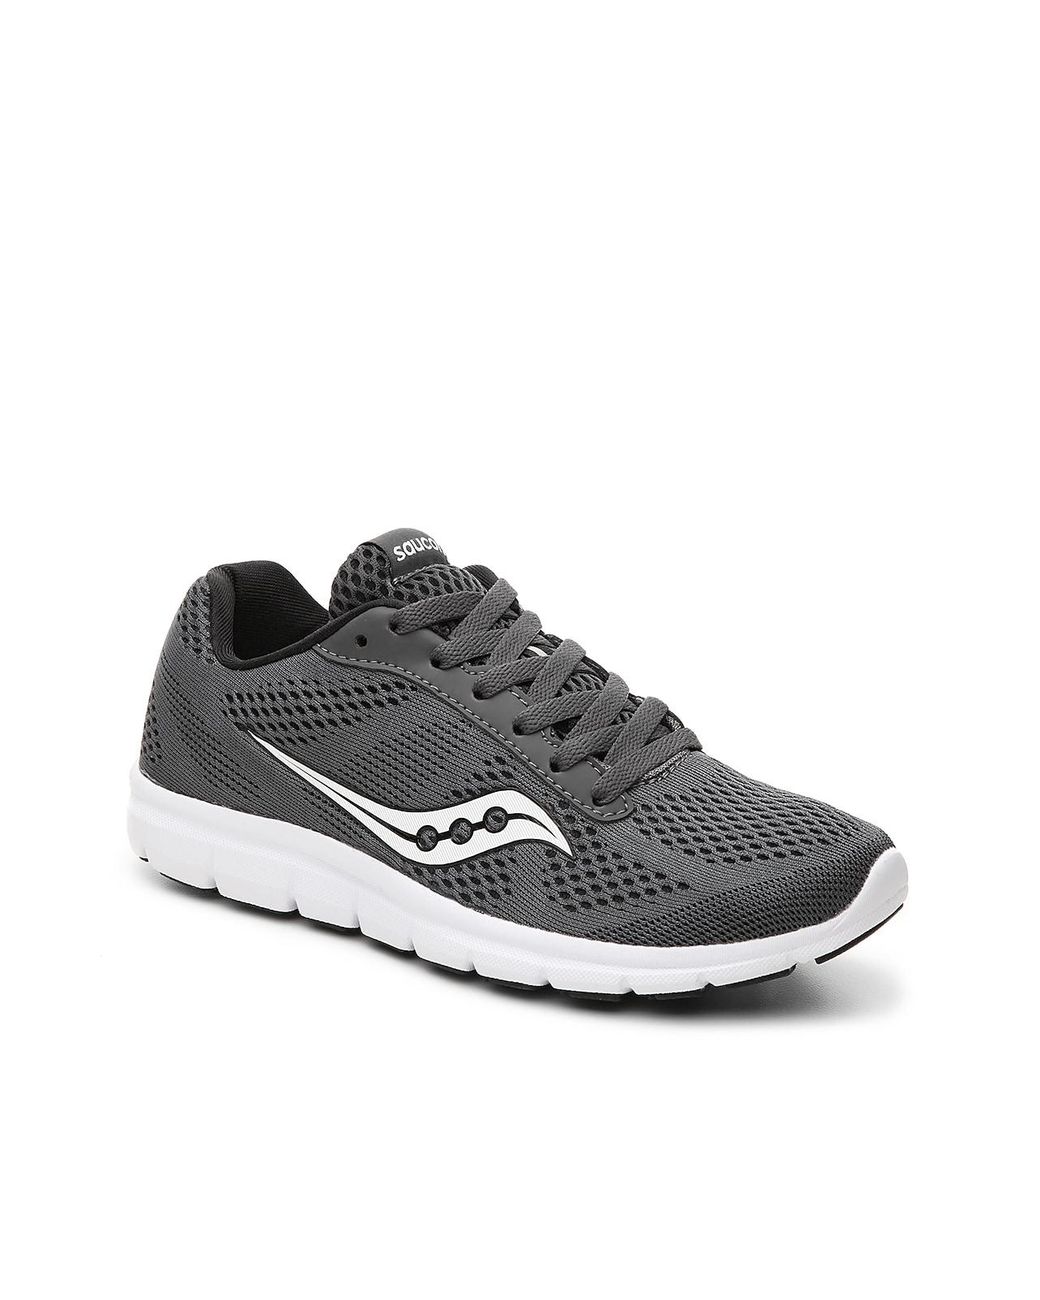 Saucony Rubber Grid Ideal Lightweight Running Shoe in Grey (Gray) | Lyst